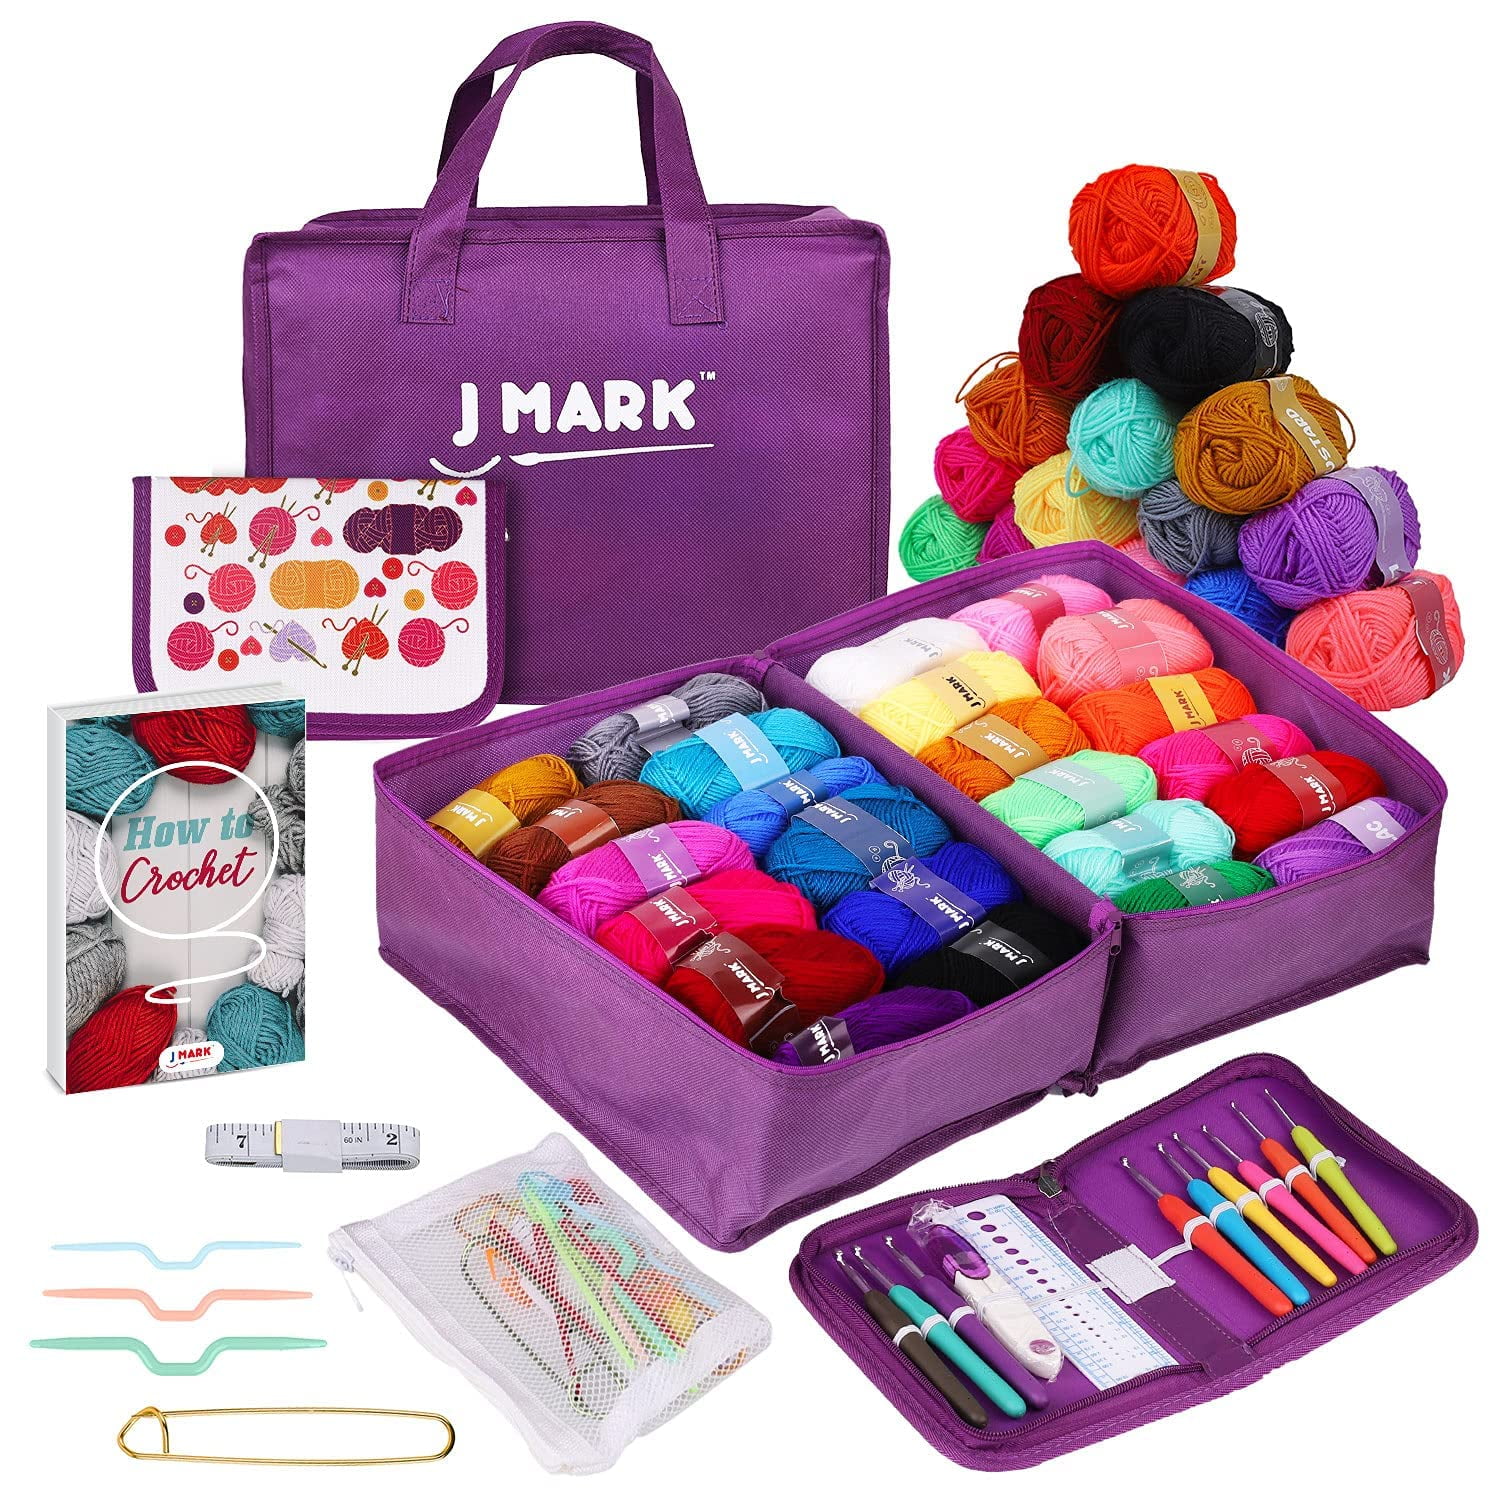 J MARK Crochet Kit for Beginners Adults and Kids -1320 Yards Knitting Kit  with Yarn Set Crochet Hook & More Large